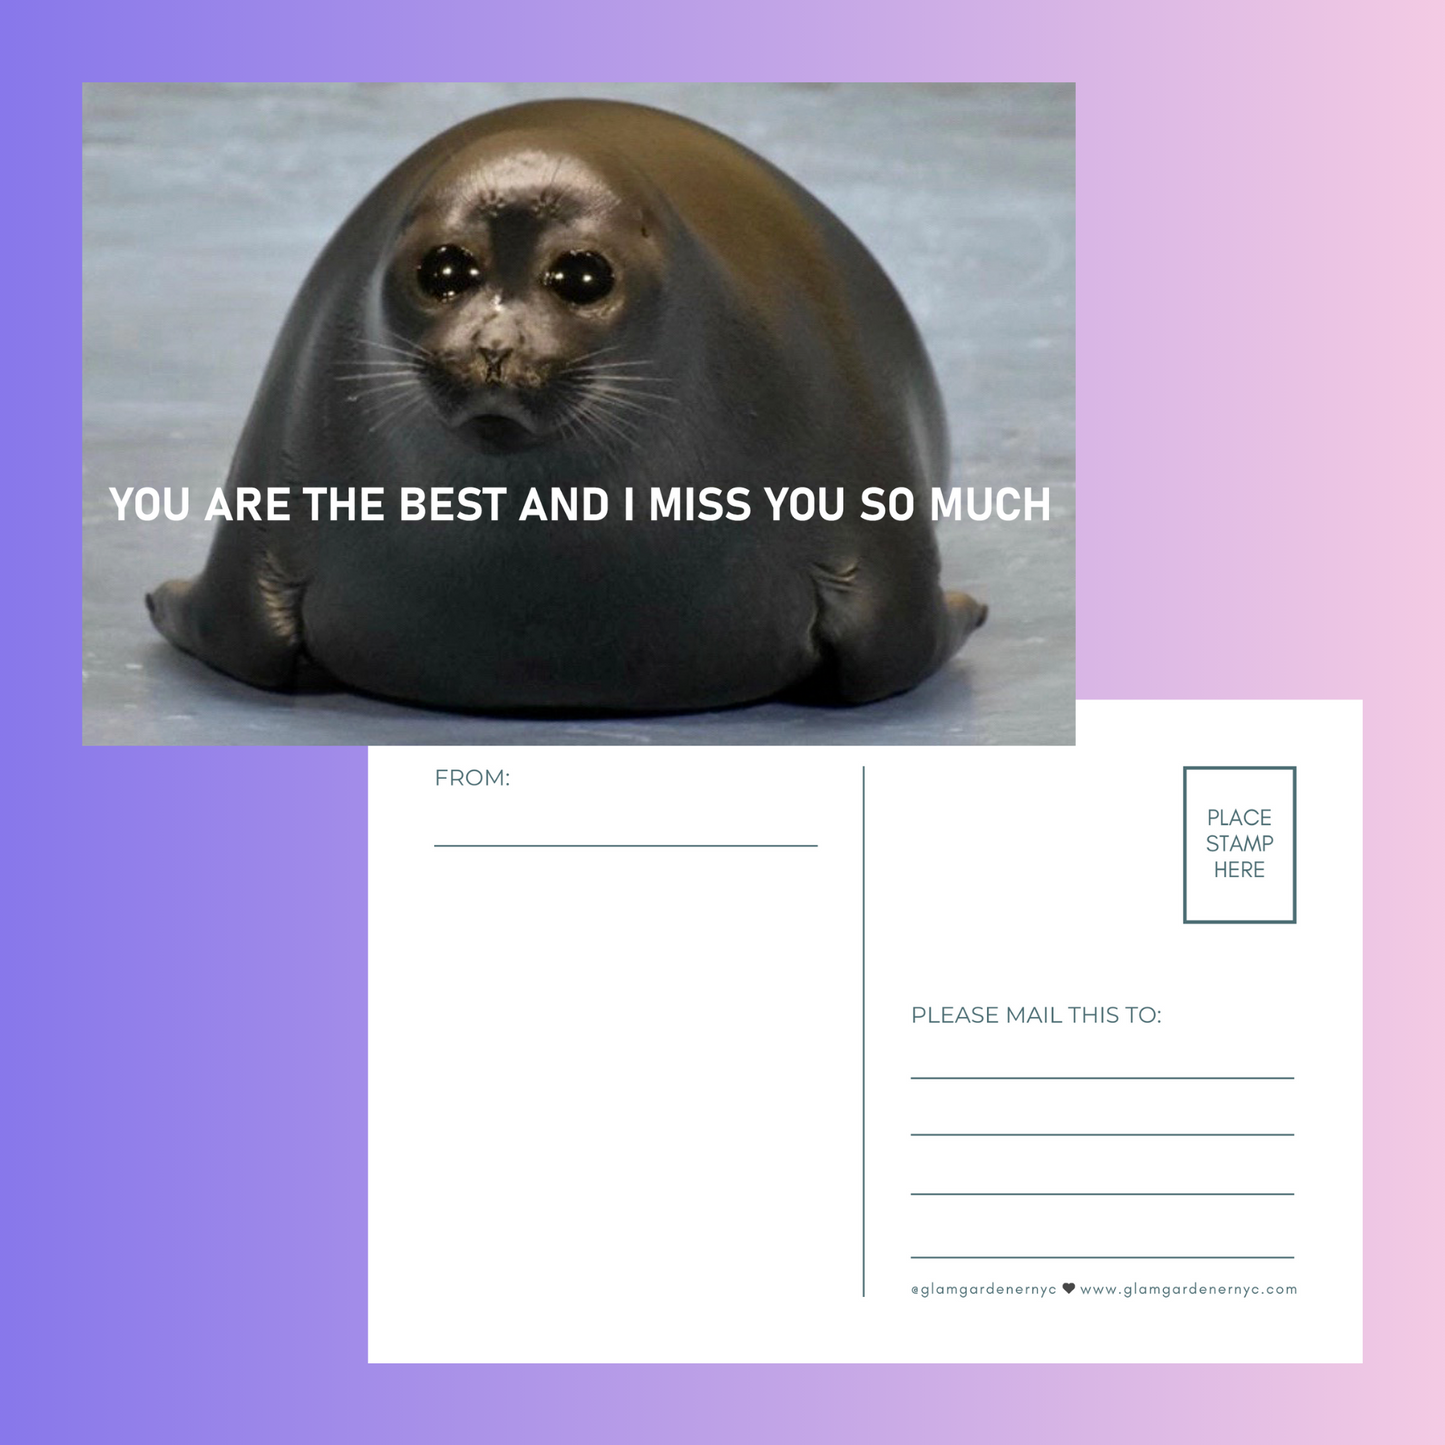 You are the best and I miss you so much post card with crying seal